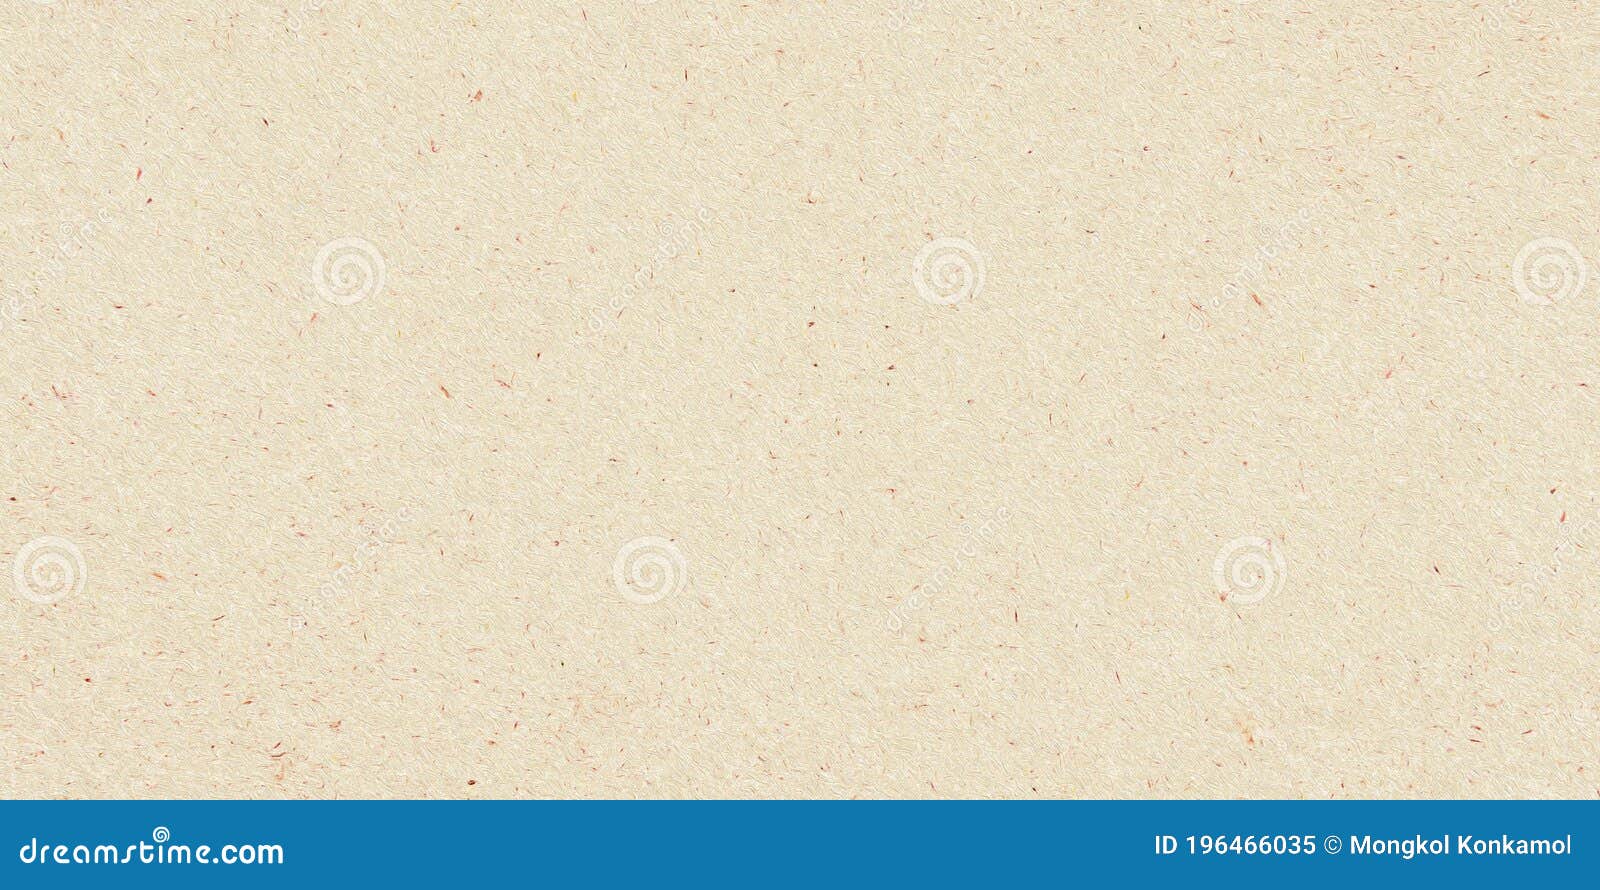 Japanese Paper Texture Background Stock Photo, Picture and Royalty Free  Image. Image 39299085.